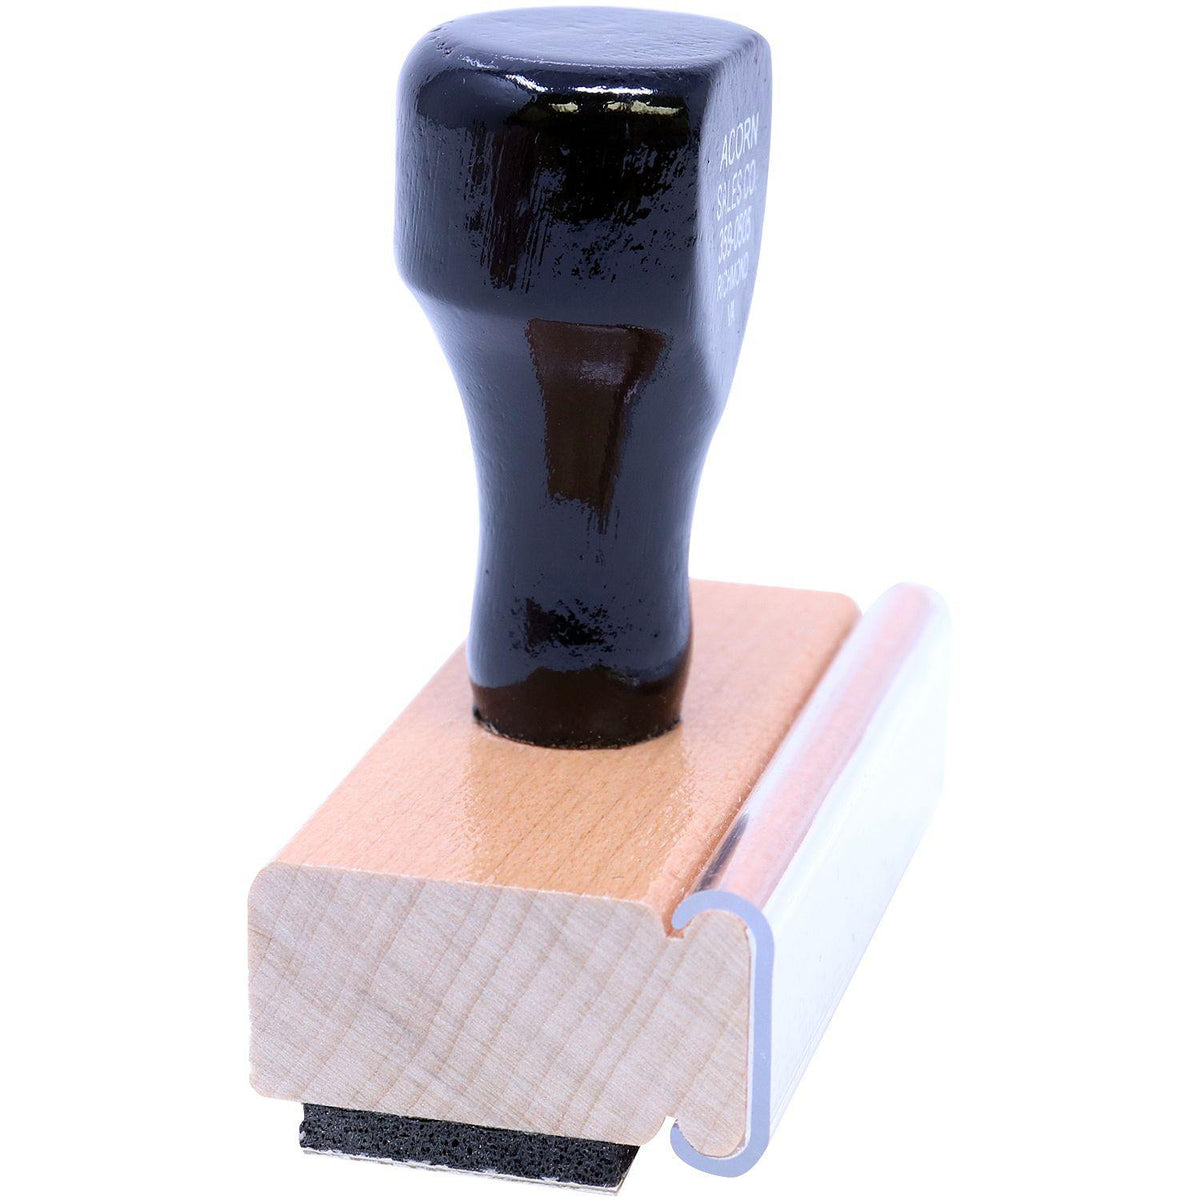 Side View of Large Outline Important Rubber Stamp at an Angle